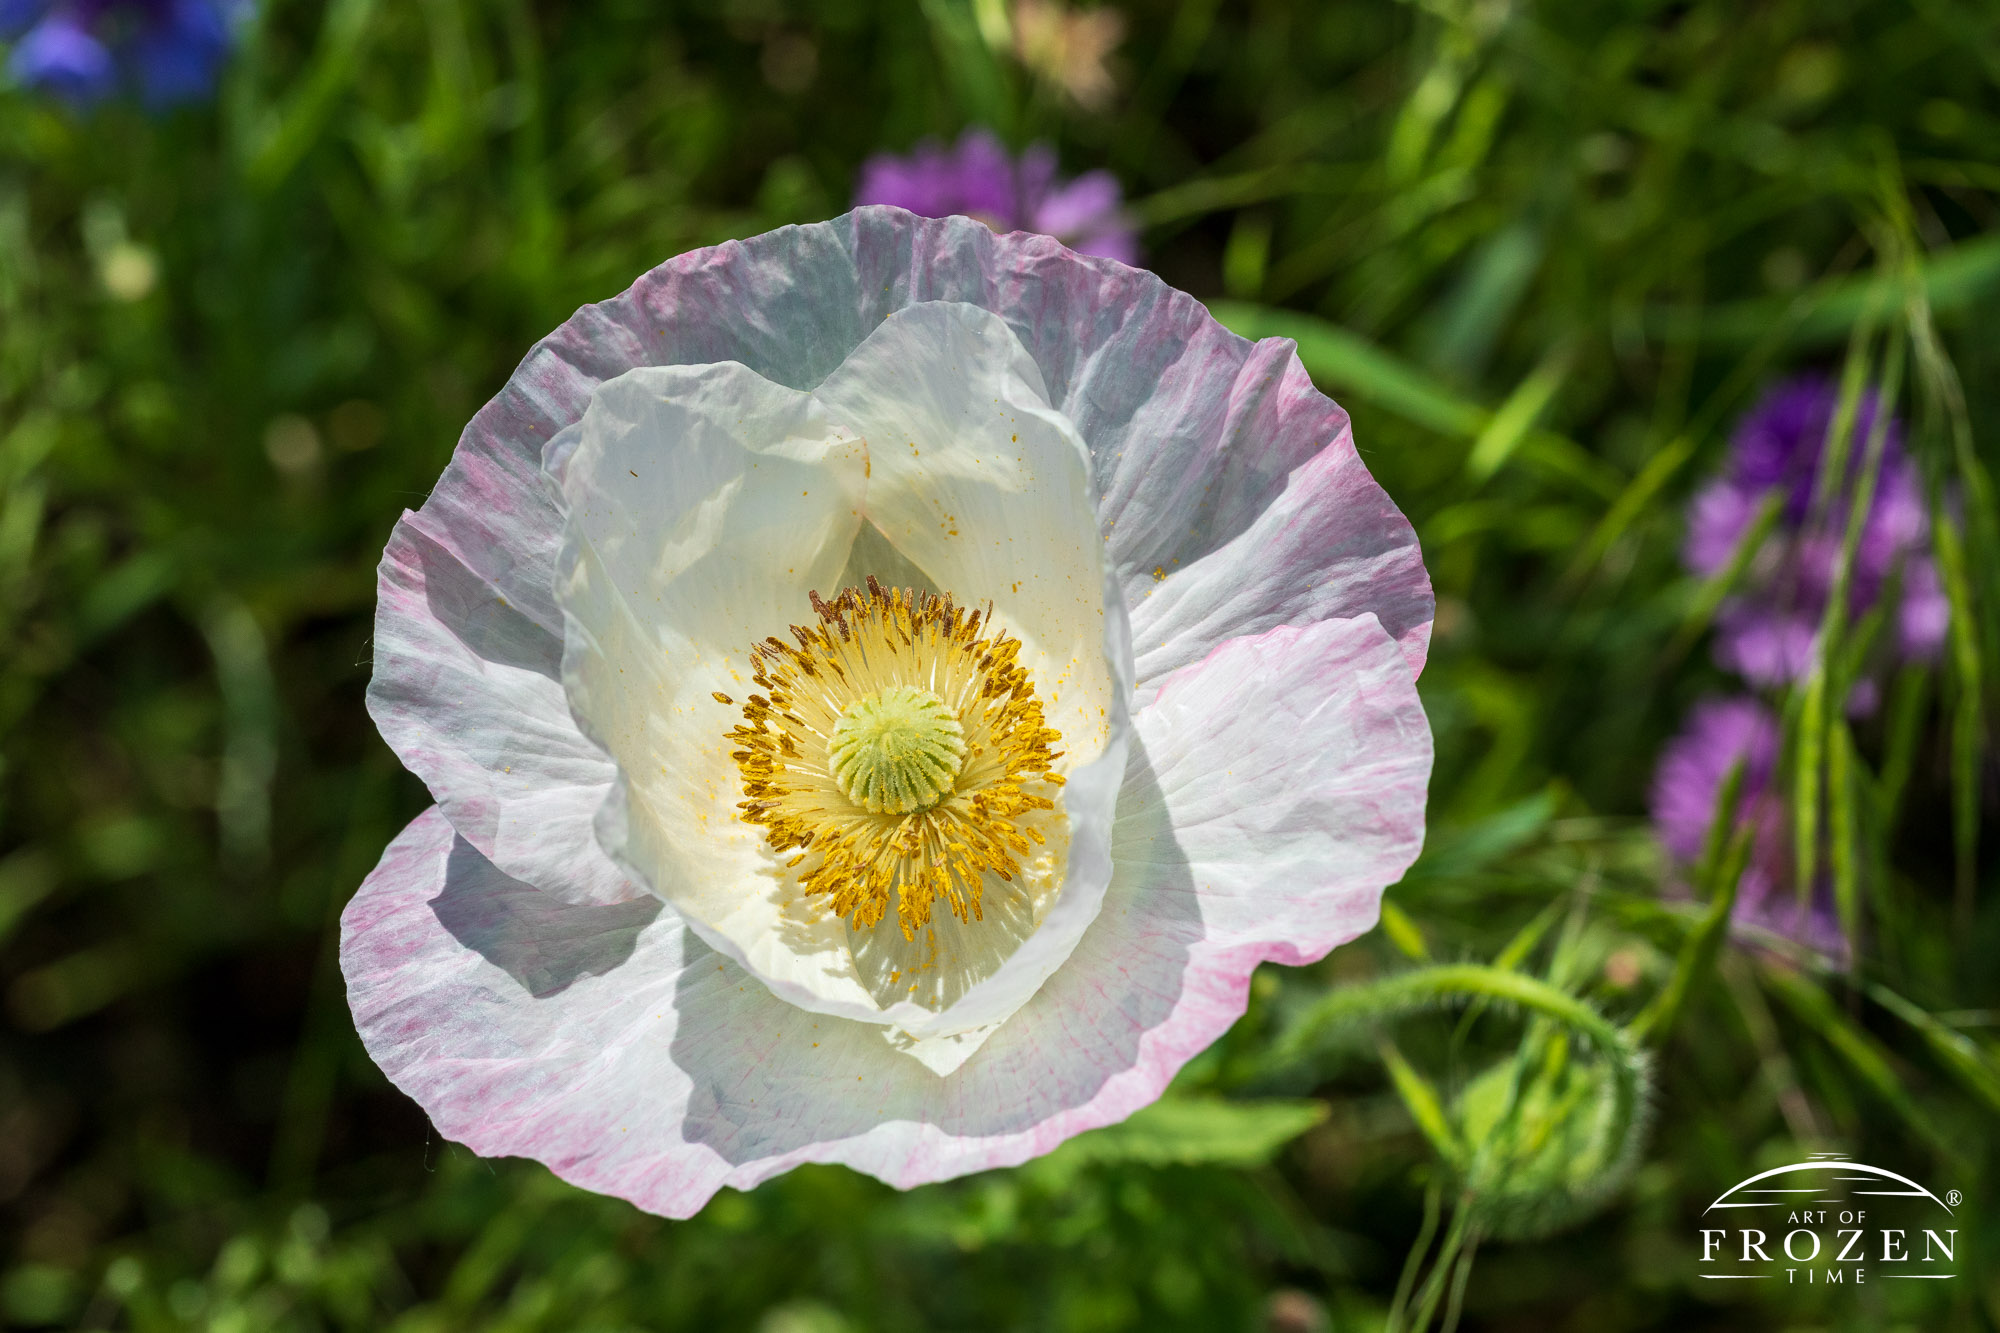 Close up view of a white poppy bloom featuring a yellow center and pink tipped petals